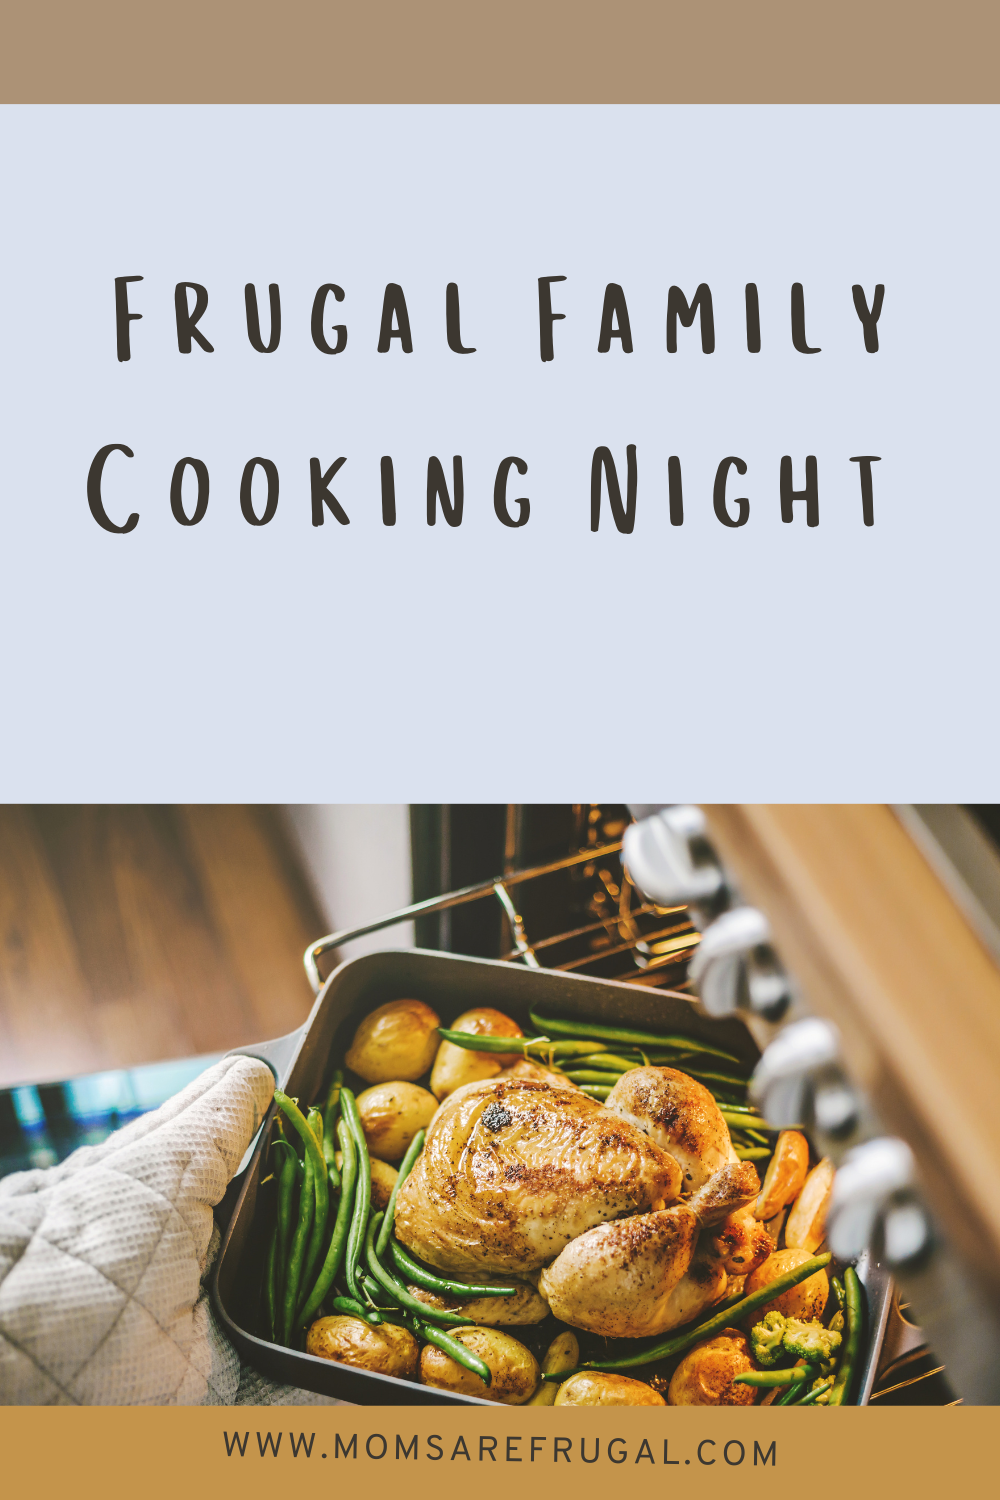 Frugal Family Cooking Night